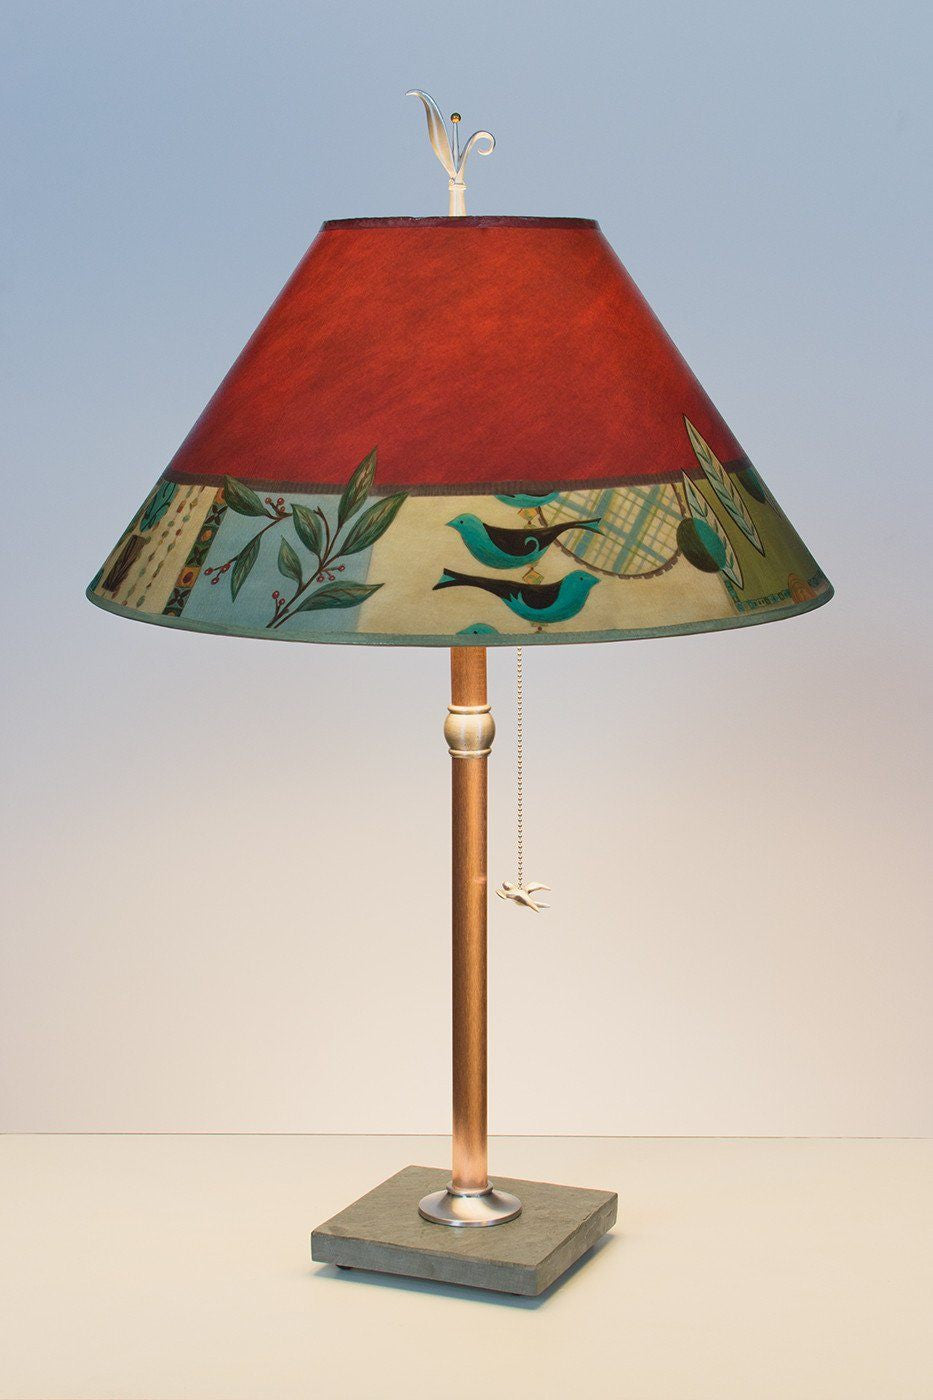 Copper Table Lamp on Vermont Slate with Large Conical Shade in New Capri